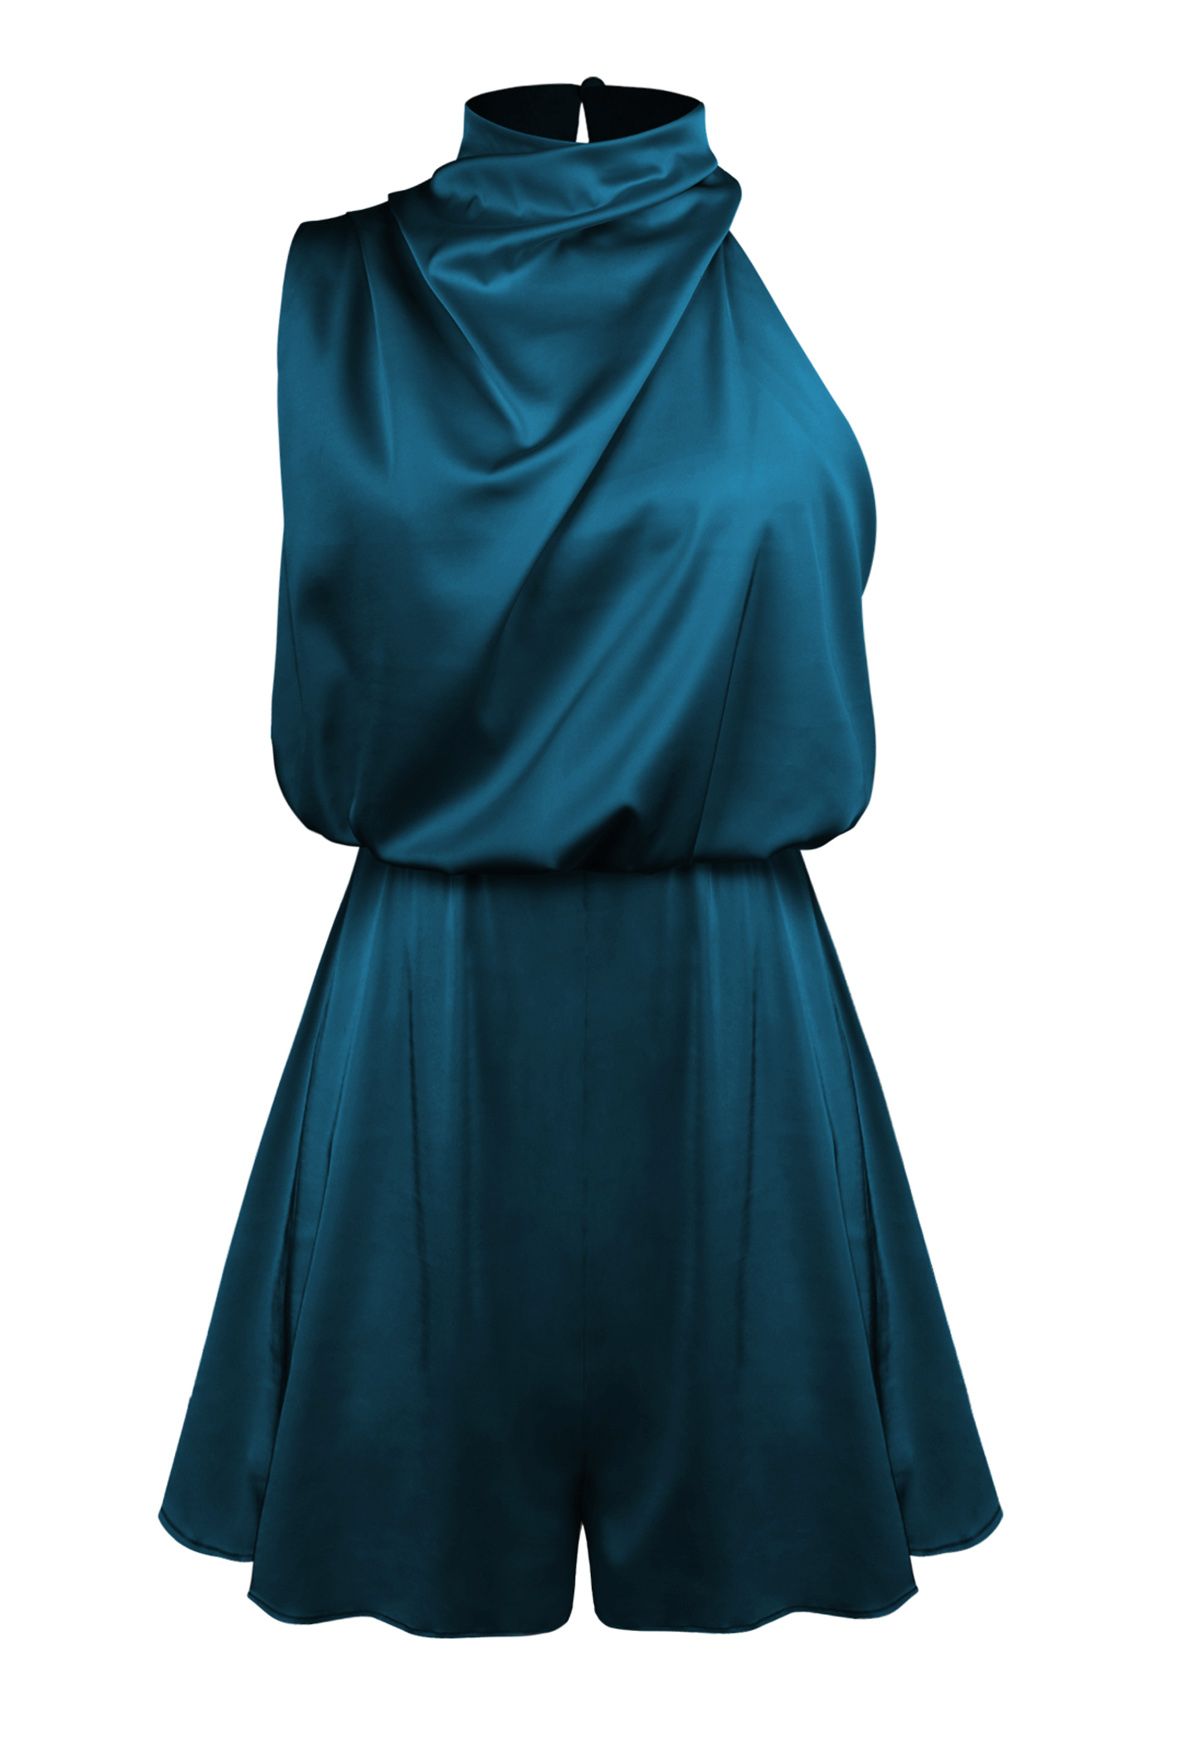 Satin Asymmetric Ruched Neckline Sleeveless Playsuit in Teal